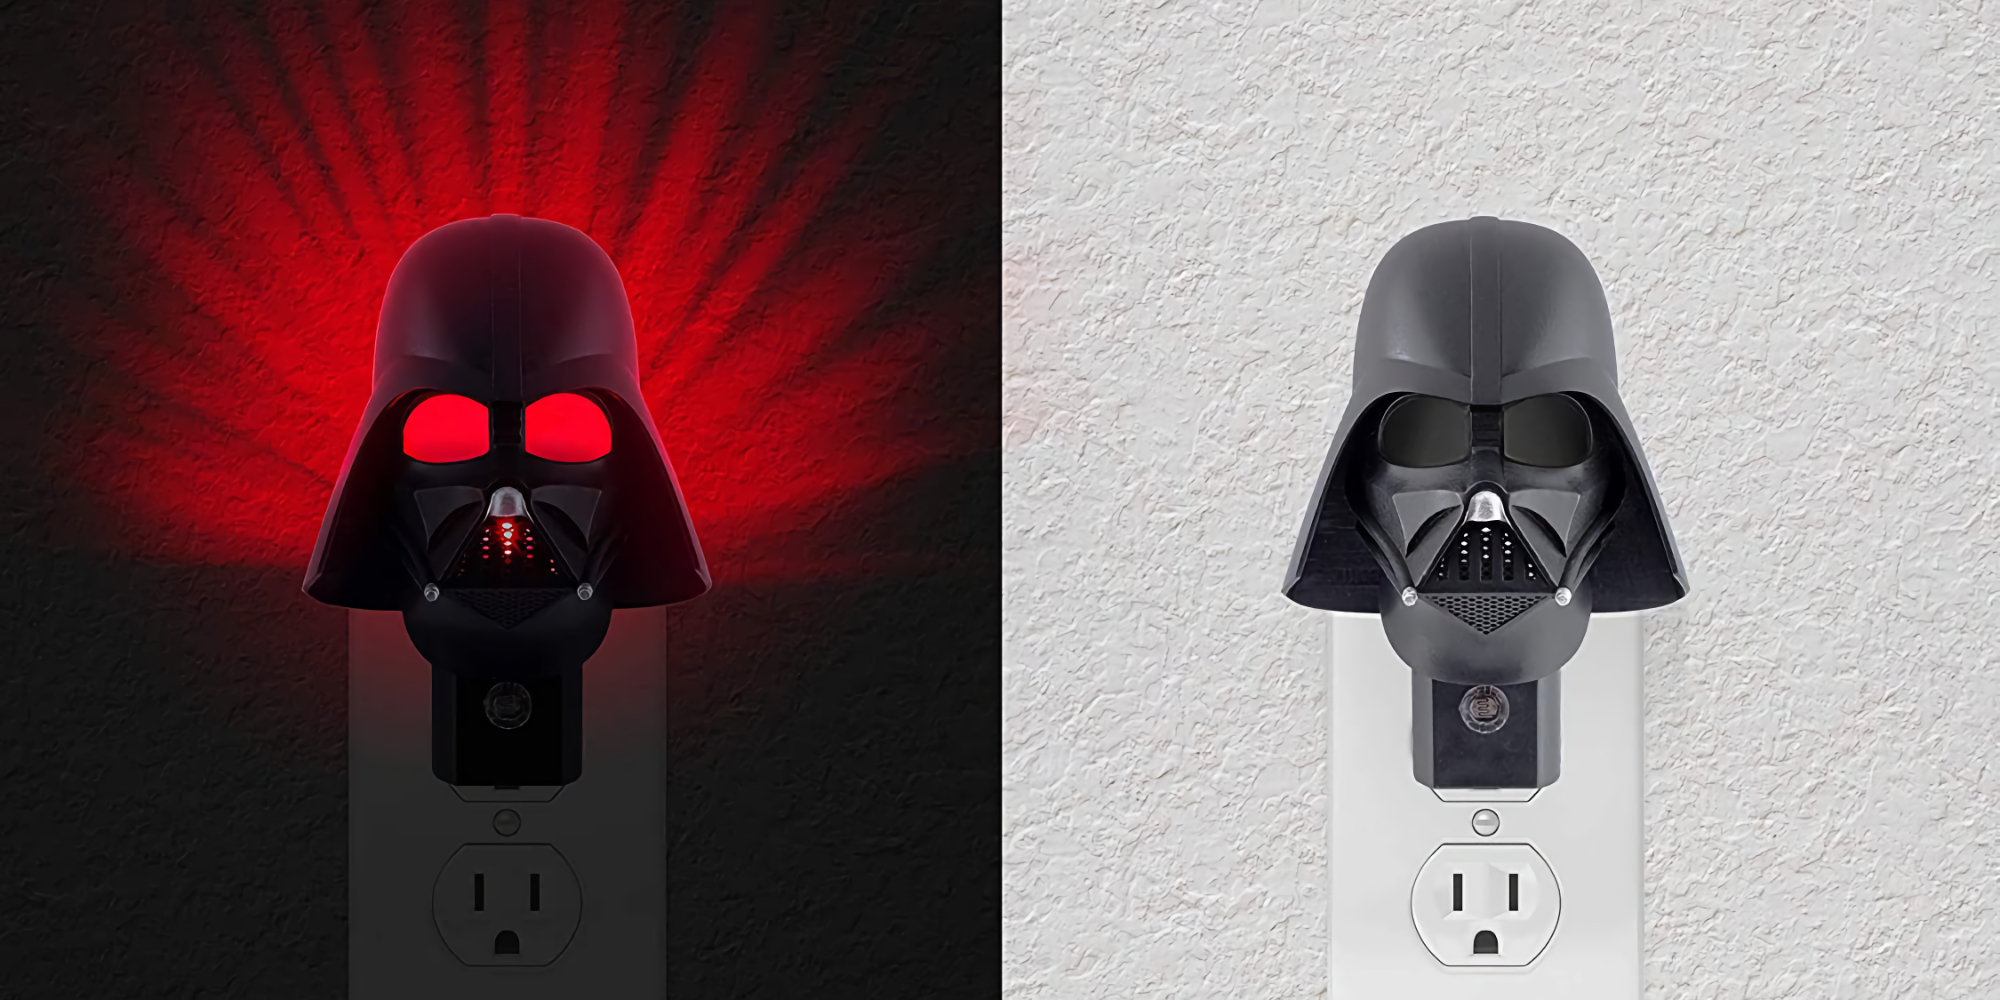 Put Darth Vader to work with this Star Wars Dusk-to-Dawn LED Night Light $6 (Save 26%)